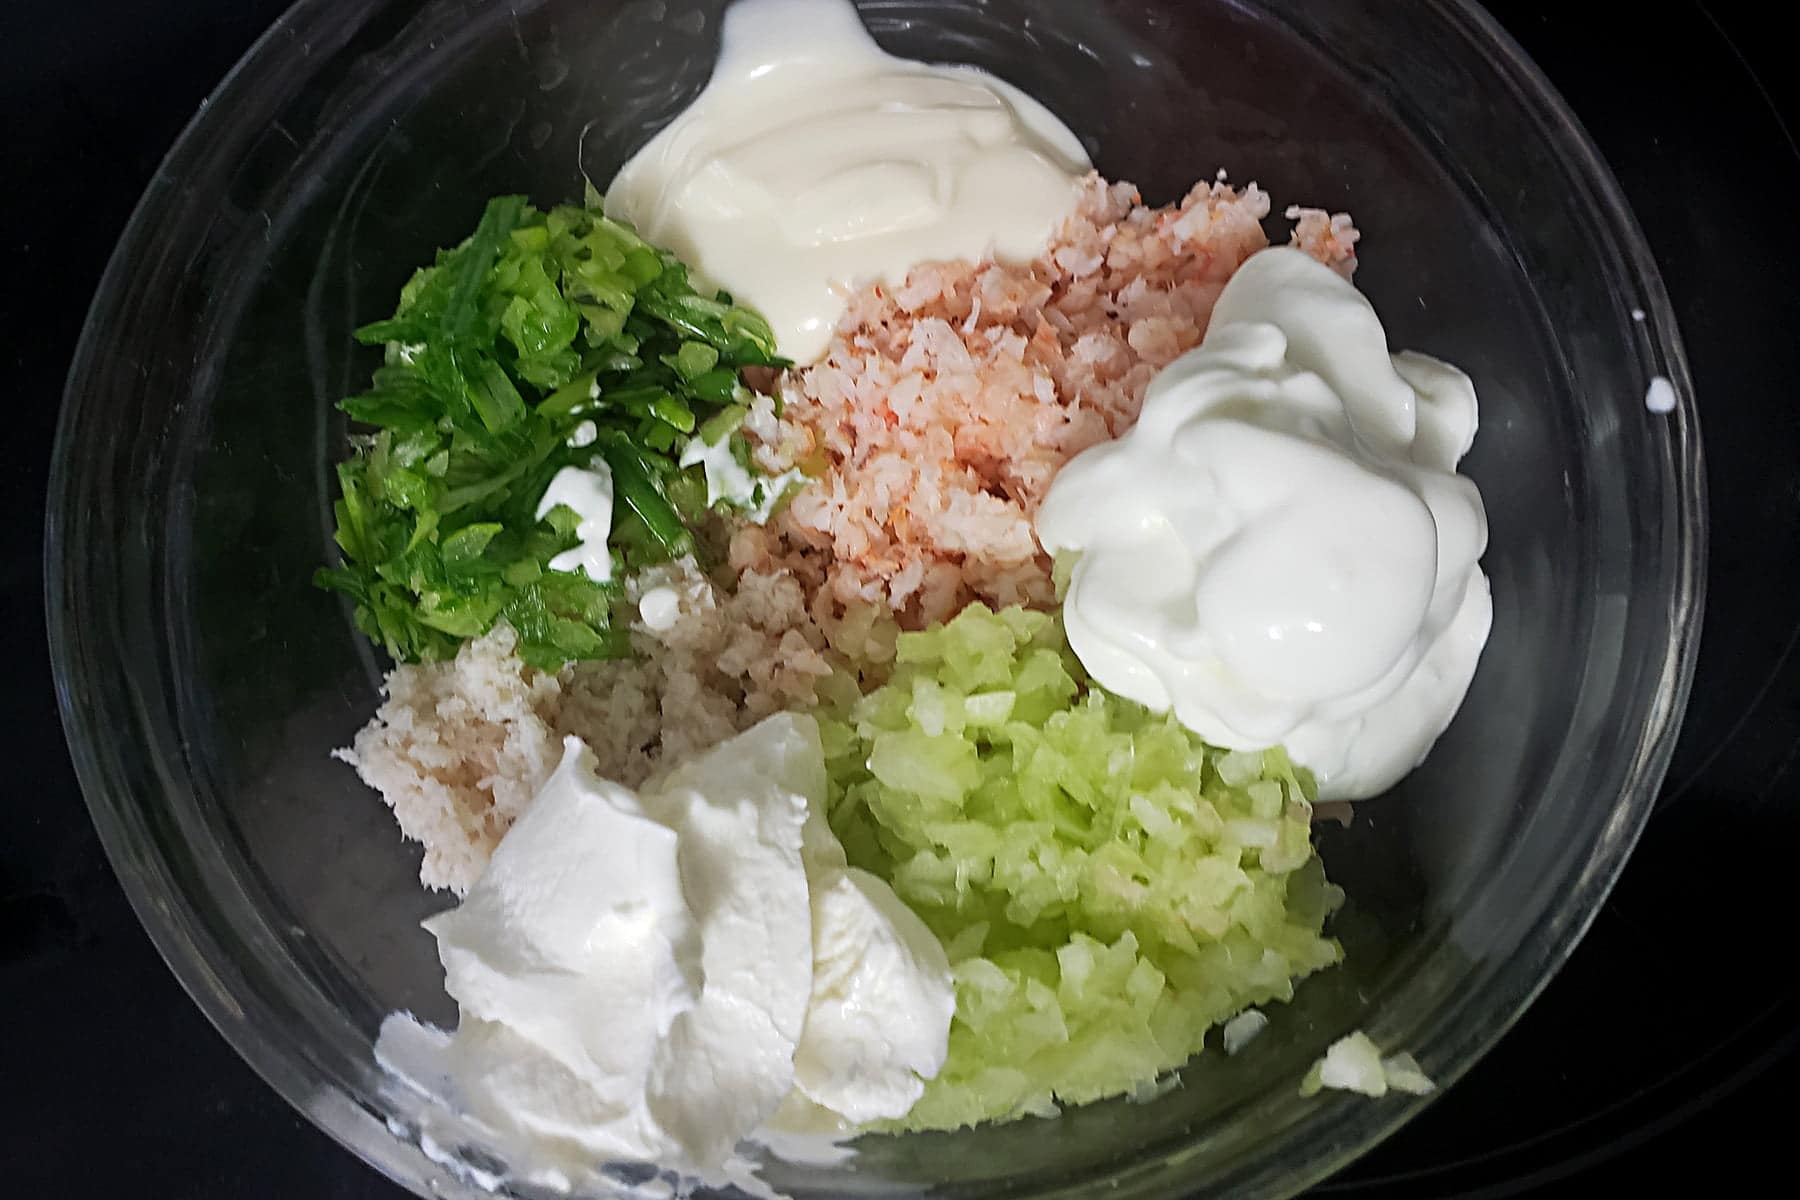 A glass bowl holds the ingredients of this seafood mousse recipe: canned seafood, celery, green onion, mayo, sour cream, and whipped cream.